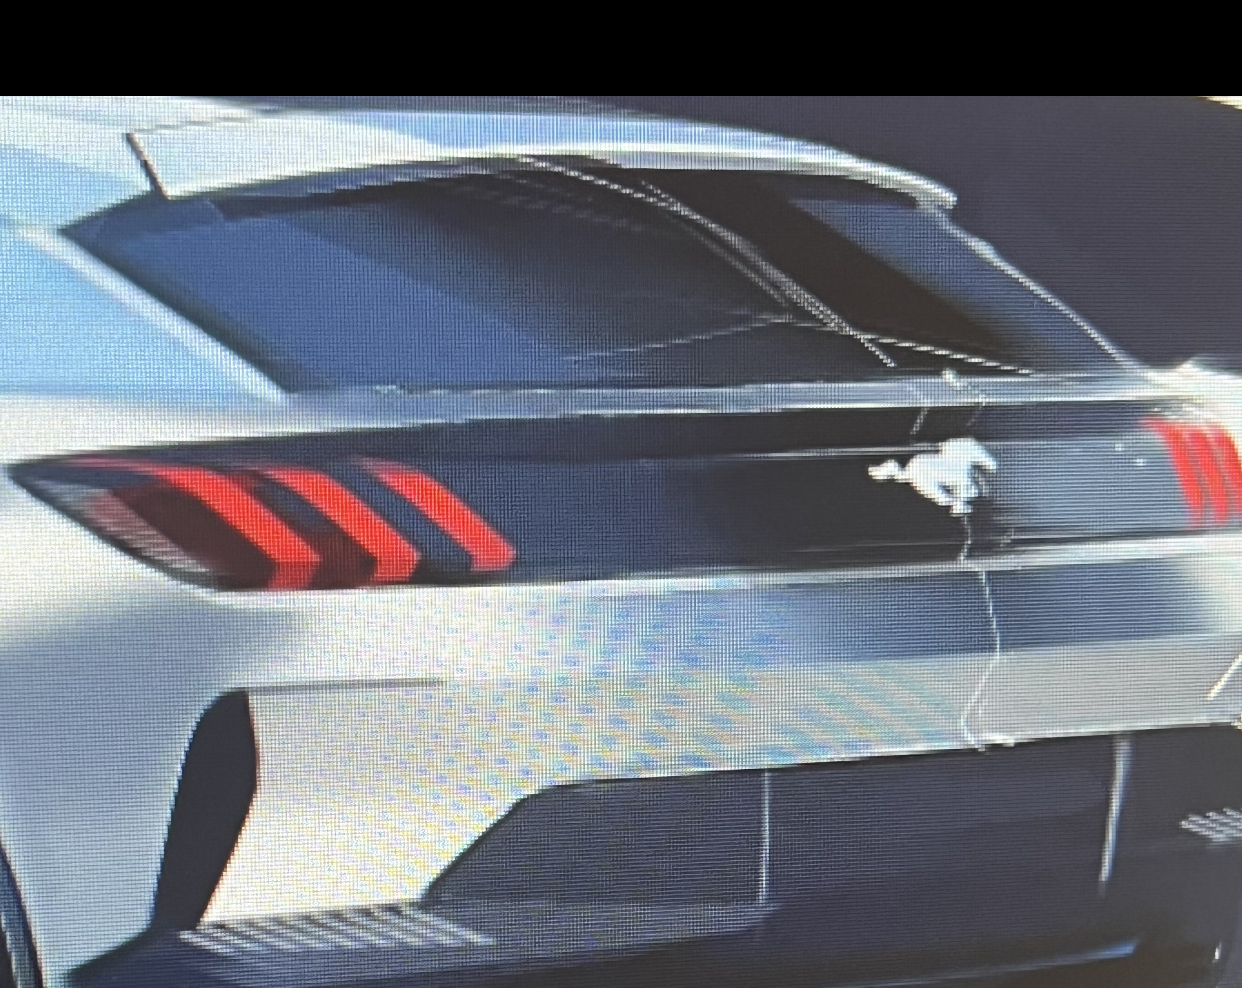 S650 Mustang chazcron weighs in... 7th gen 2023 Mustang S650 3D model & renderings in several colors! 9E1FACBB-F750-46E4-829B-D6AF03DD5303